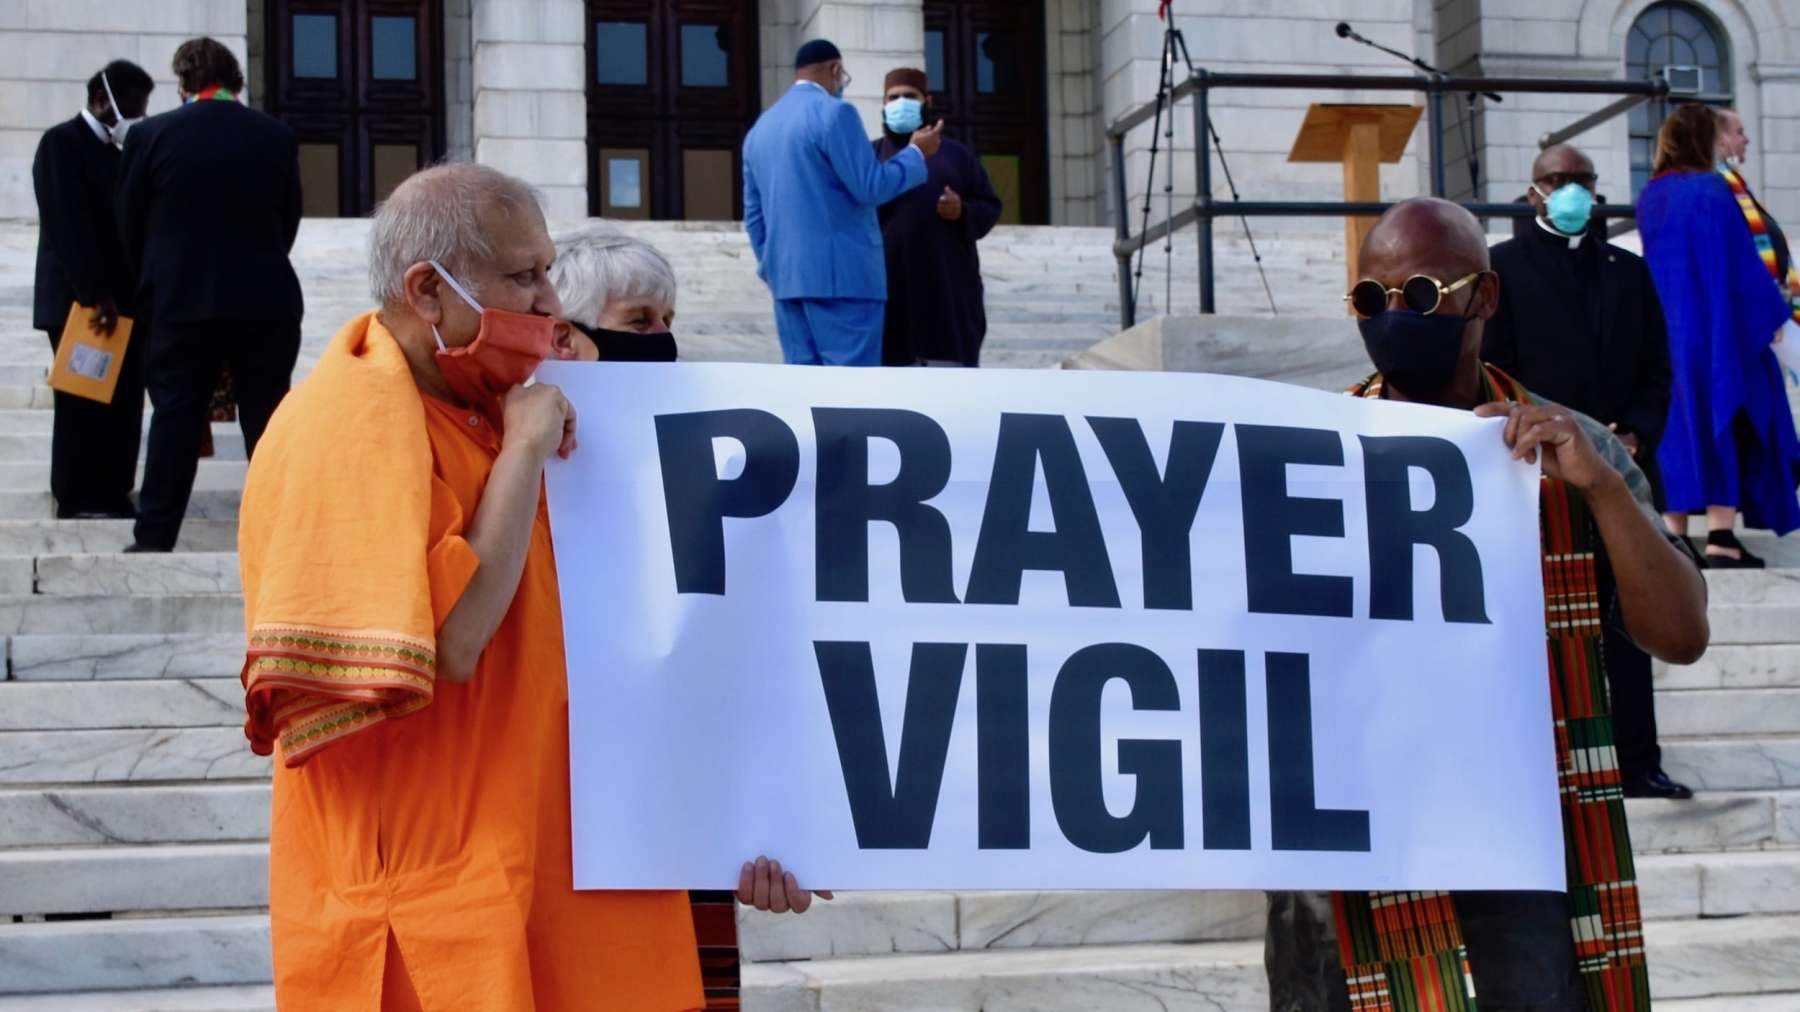 Rhode Island News: Rhode Island religious leaders hold prayer vigil/call to action on racism